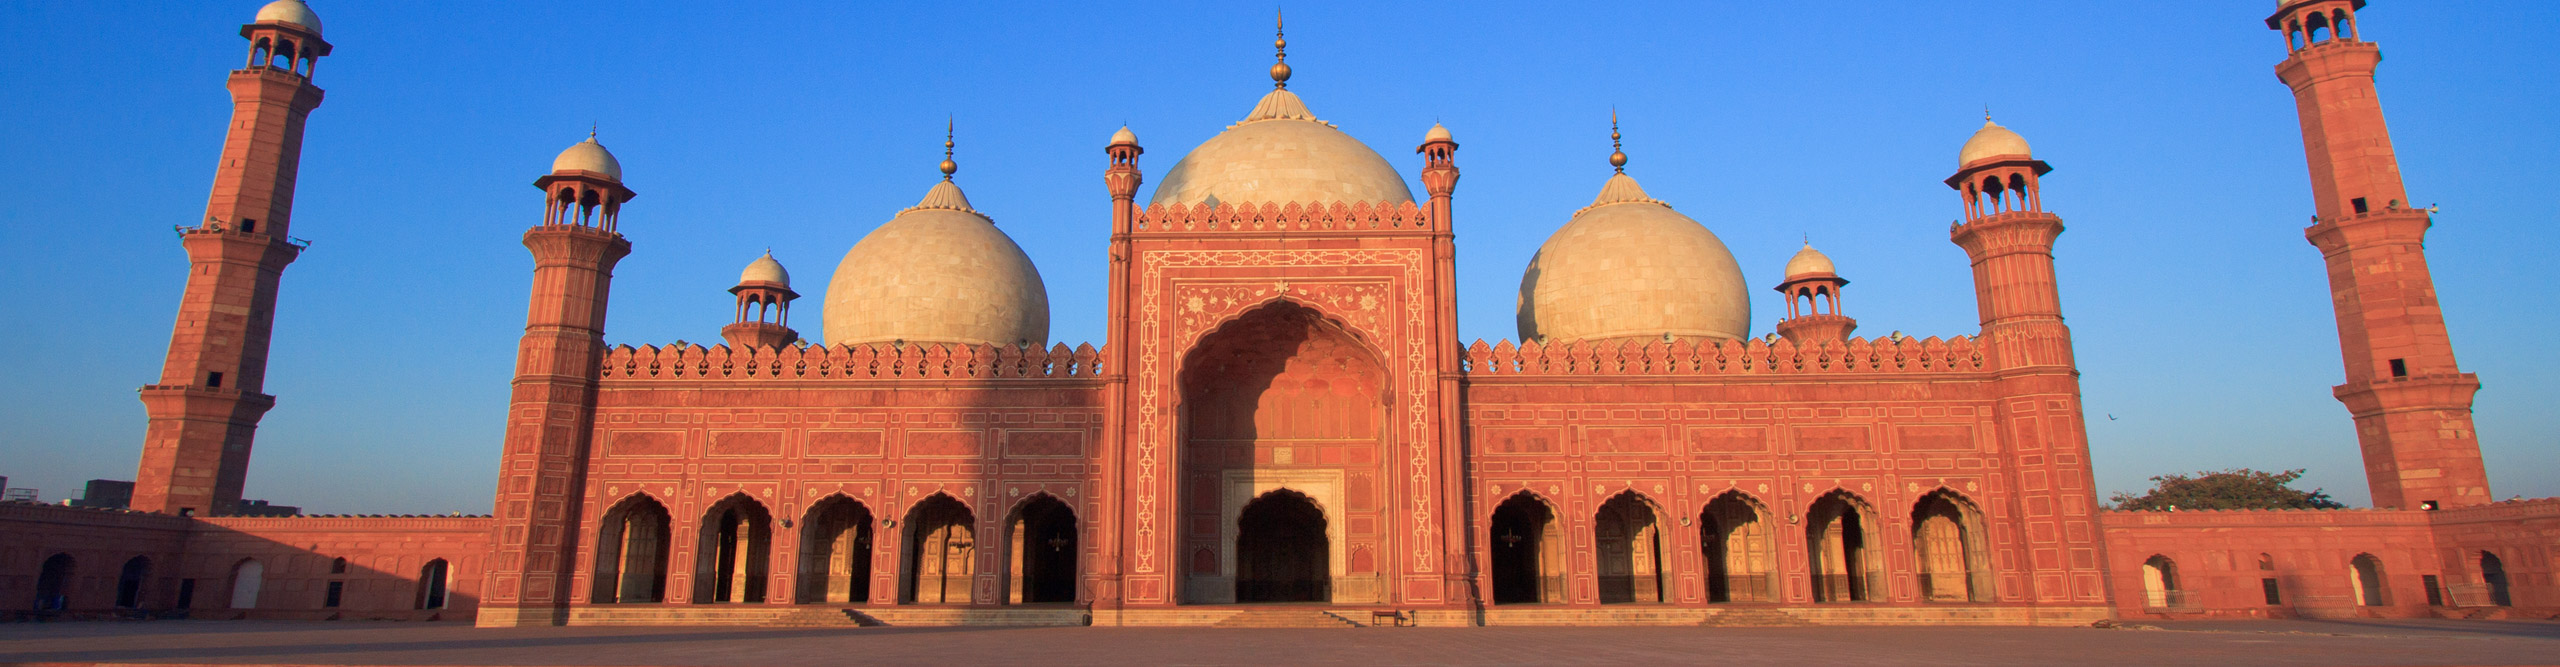 The grand and beautiful Badshahi Mosque, in the glow of the late afternoon sun,  Lahore, Pakistan